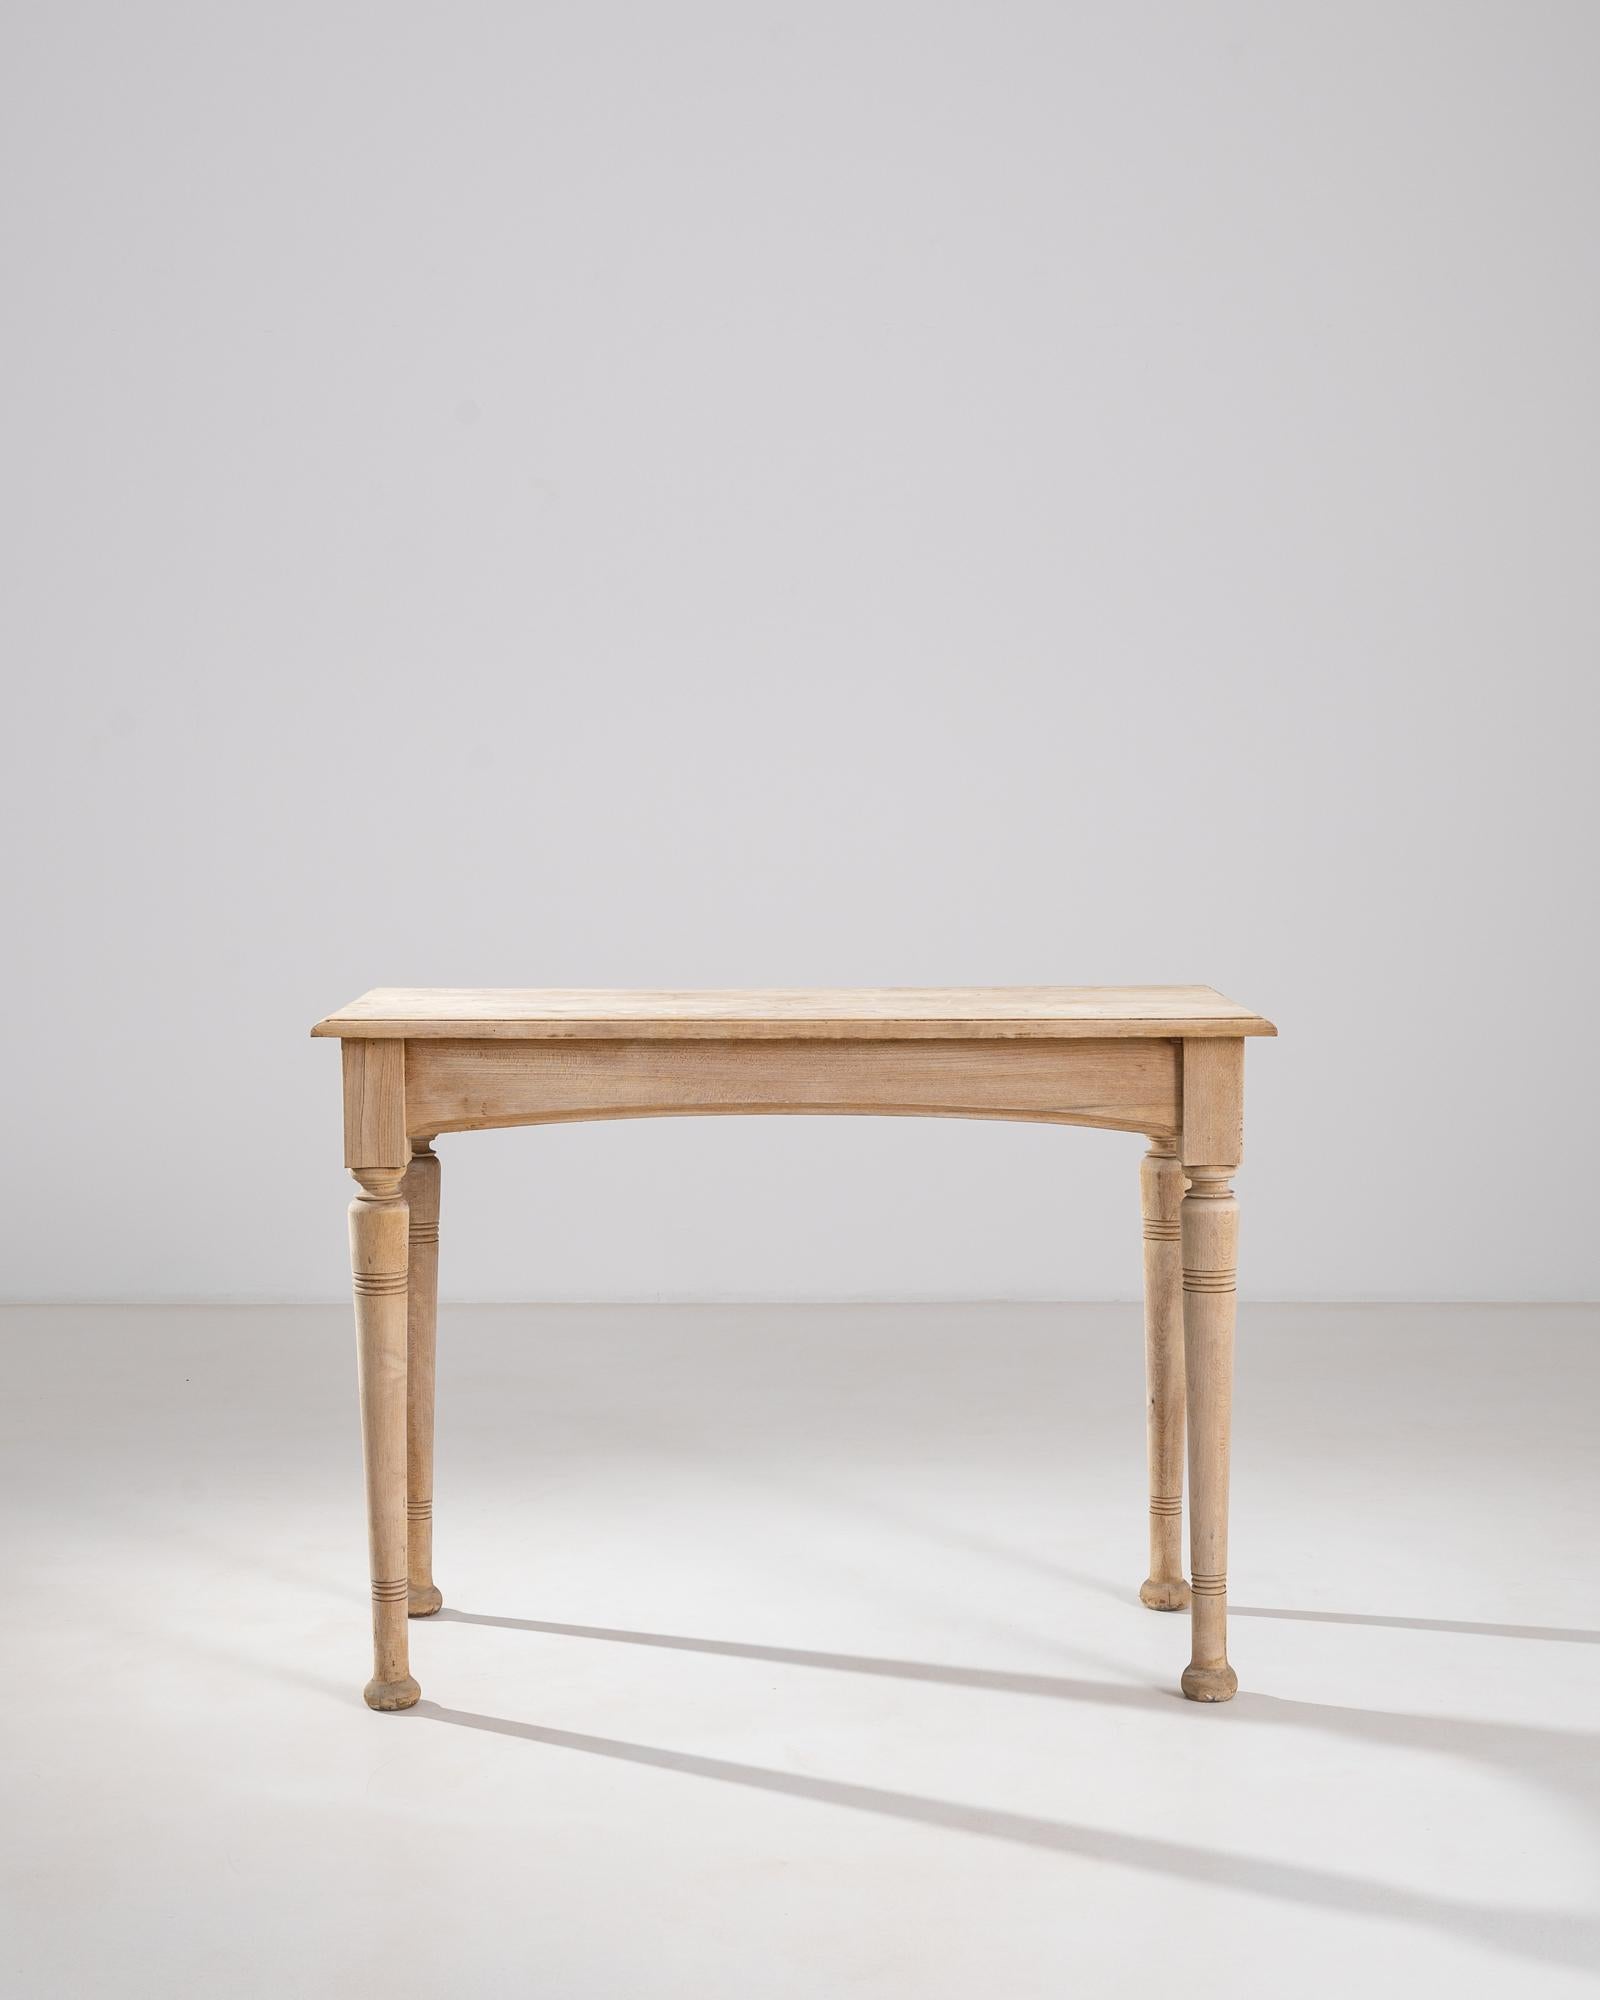 This enchanting table was made in France circa 1900. Turned legs make an elegant effect, enhancing the clean lines of the piece’s silhouette, for an engaging and composed piece of furniture. The wood has been refreshing in our atelier, hues of ash